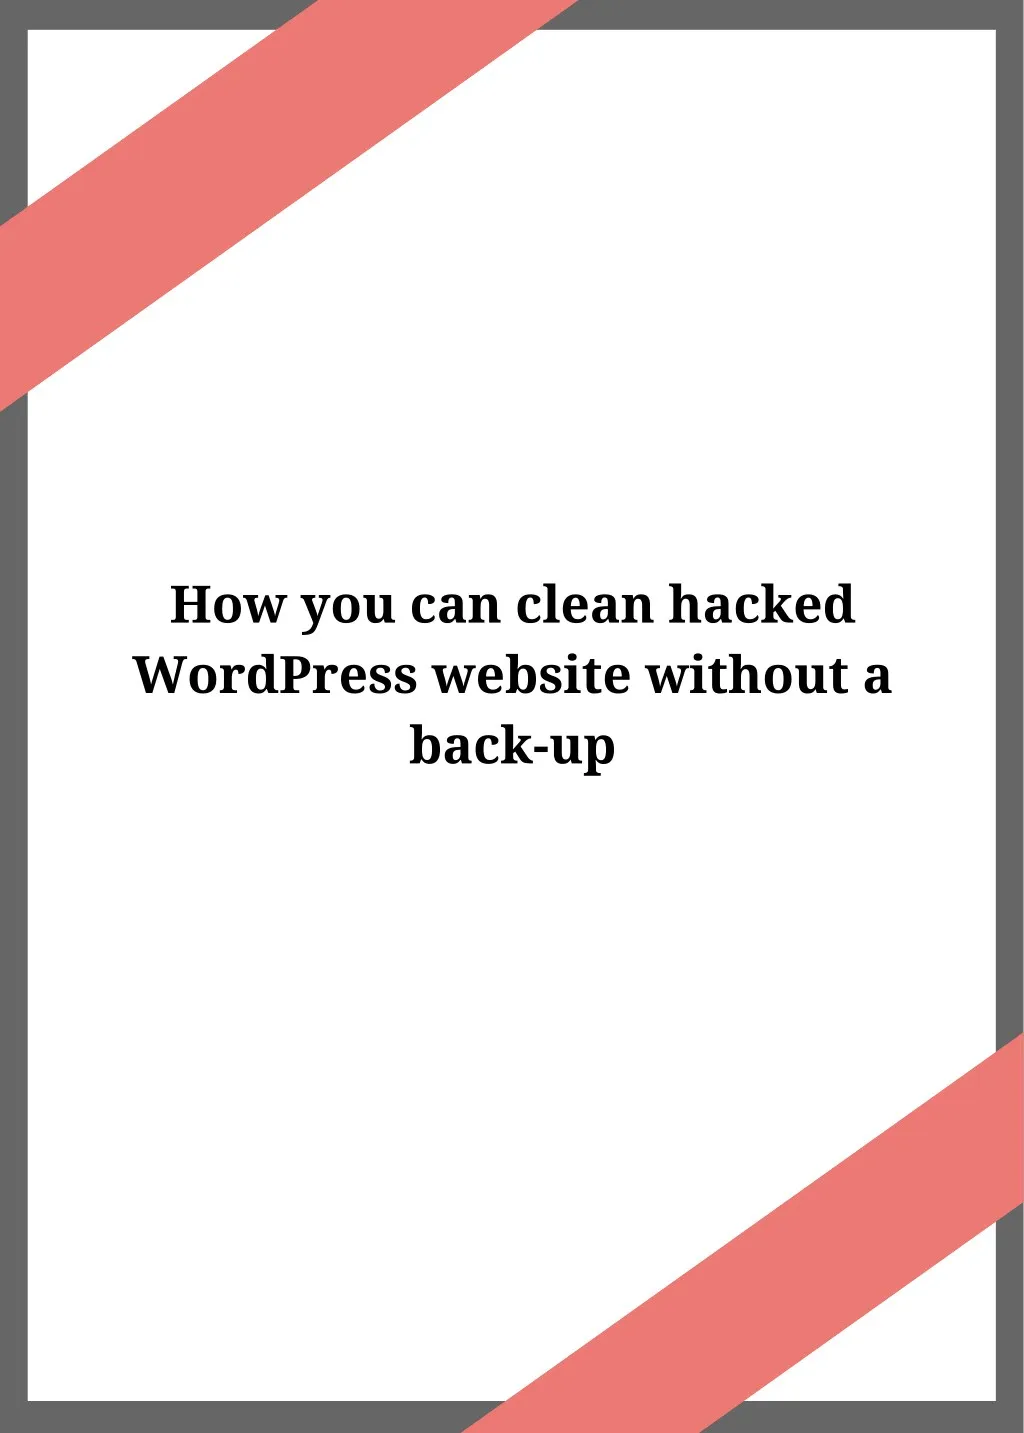 how you can clean hacked wordpress website